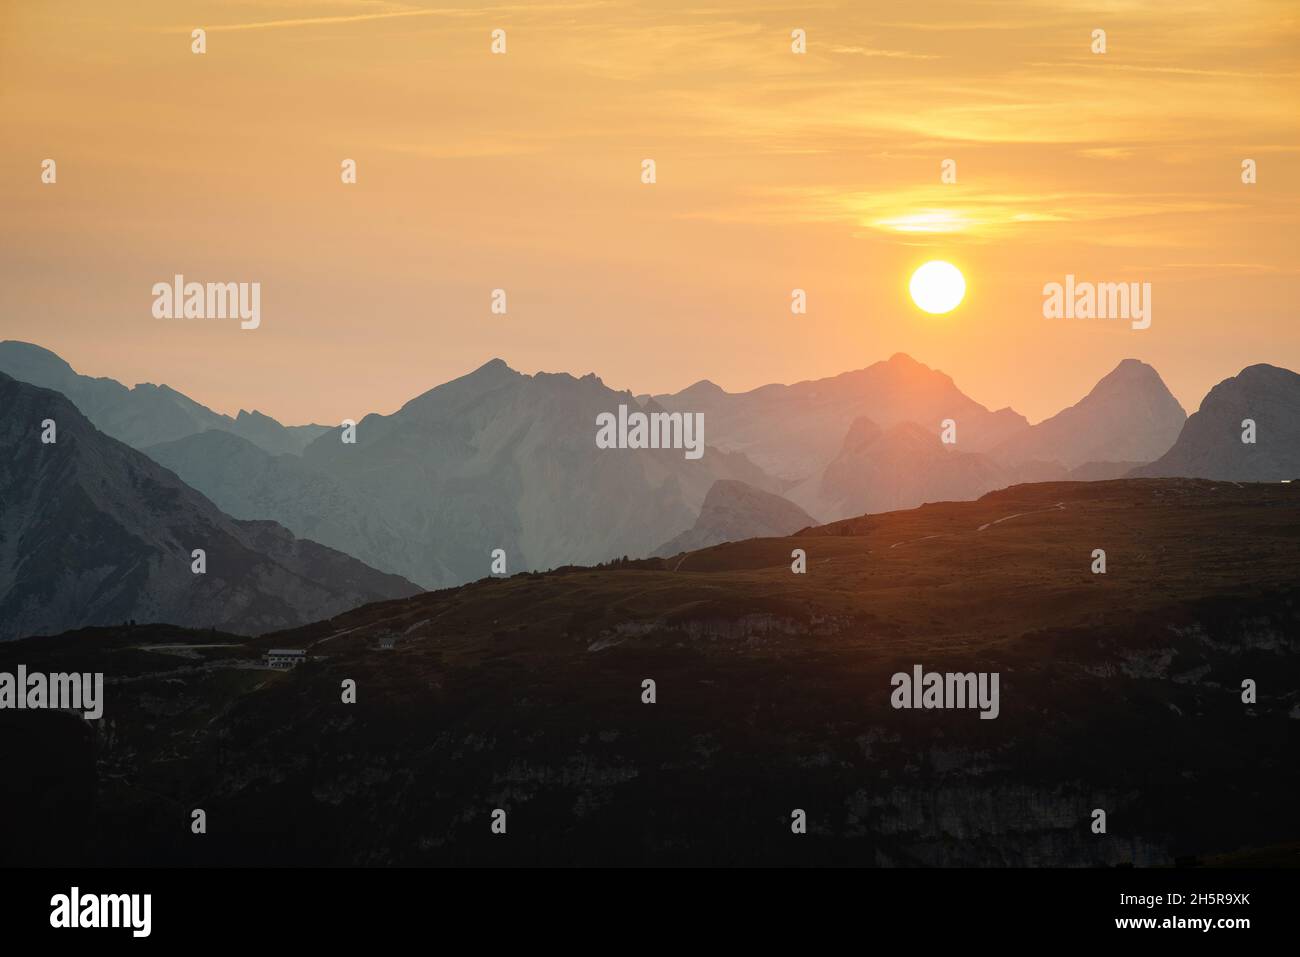 Sunset in the Dolomites mountains, Italy Stock Photo